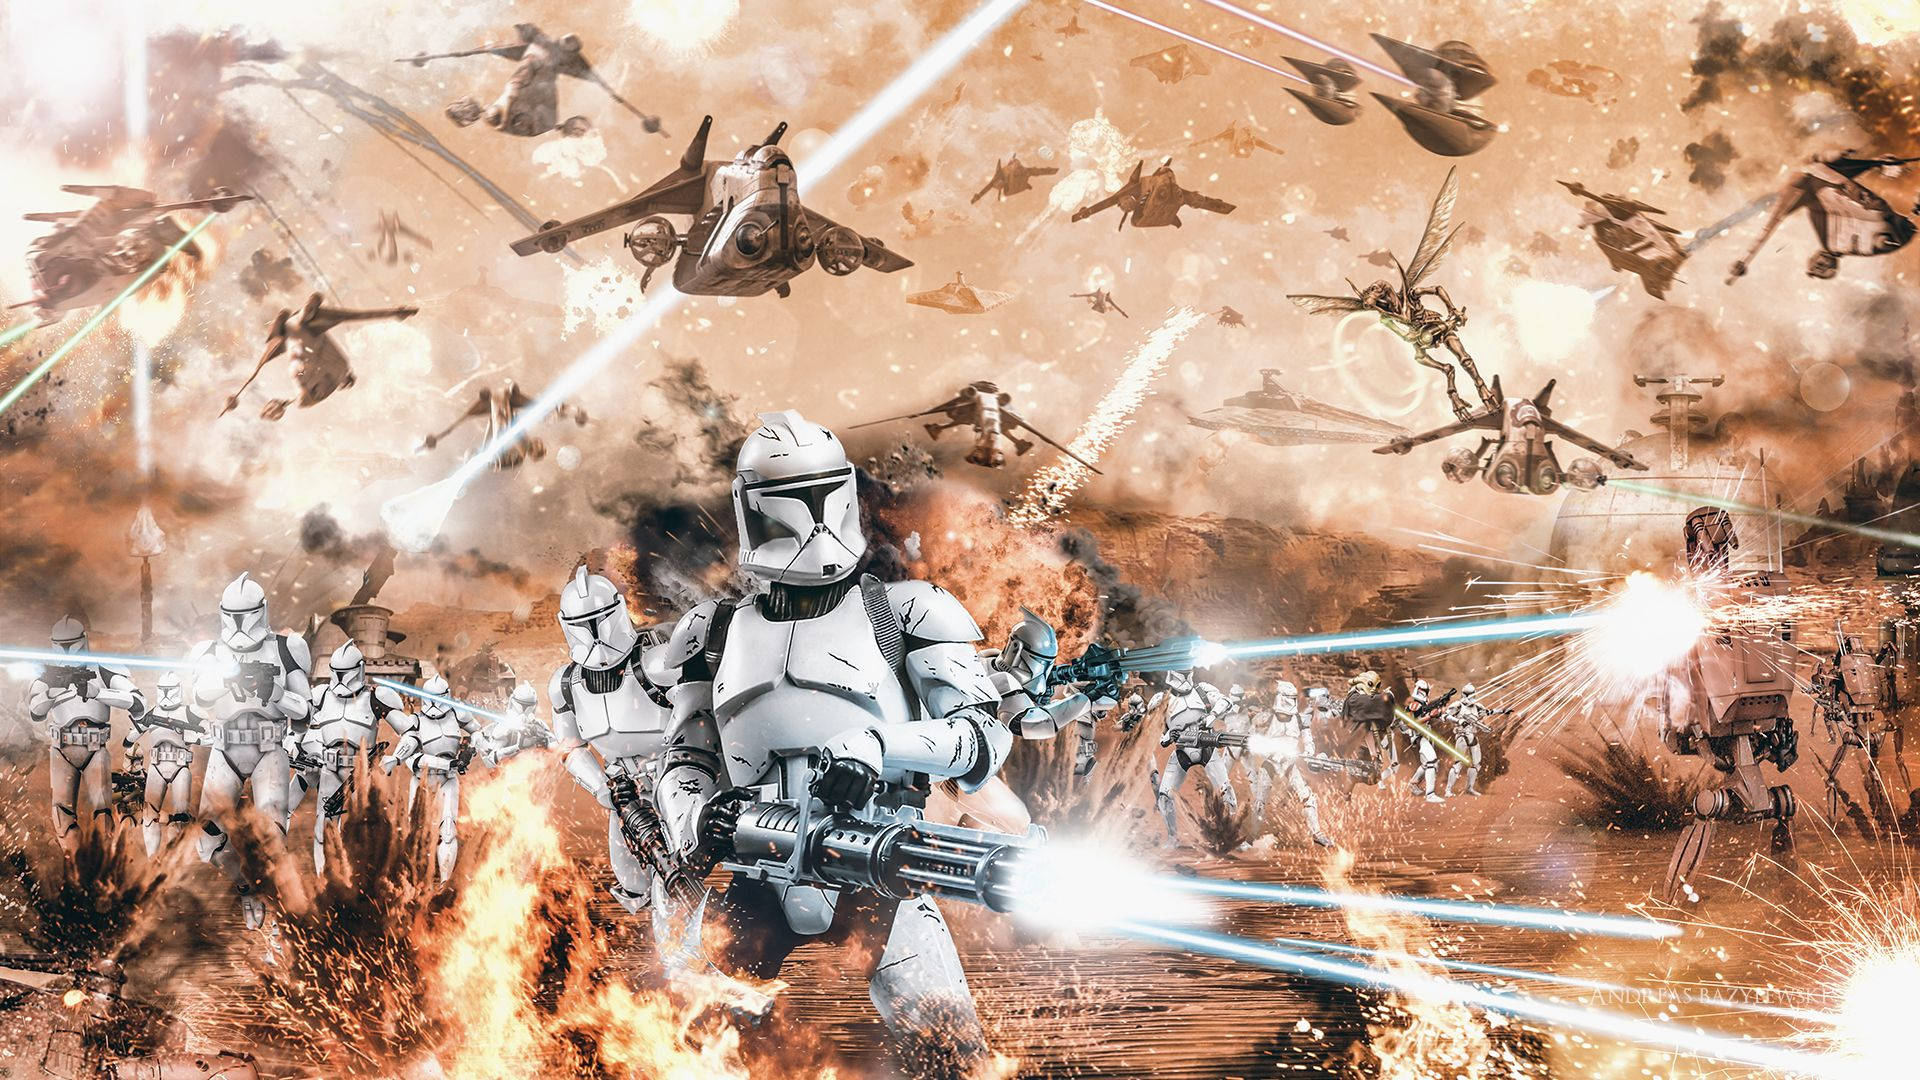 Image Clone Troopers Lead Attack In Severed Star Wars Battle Background